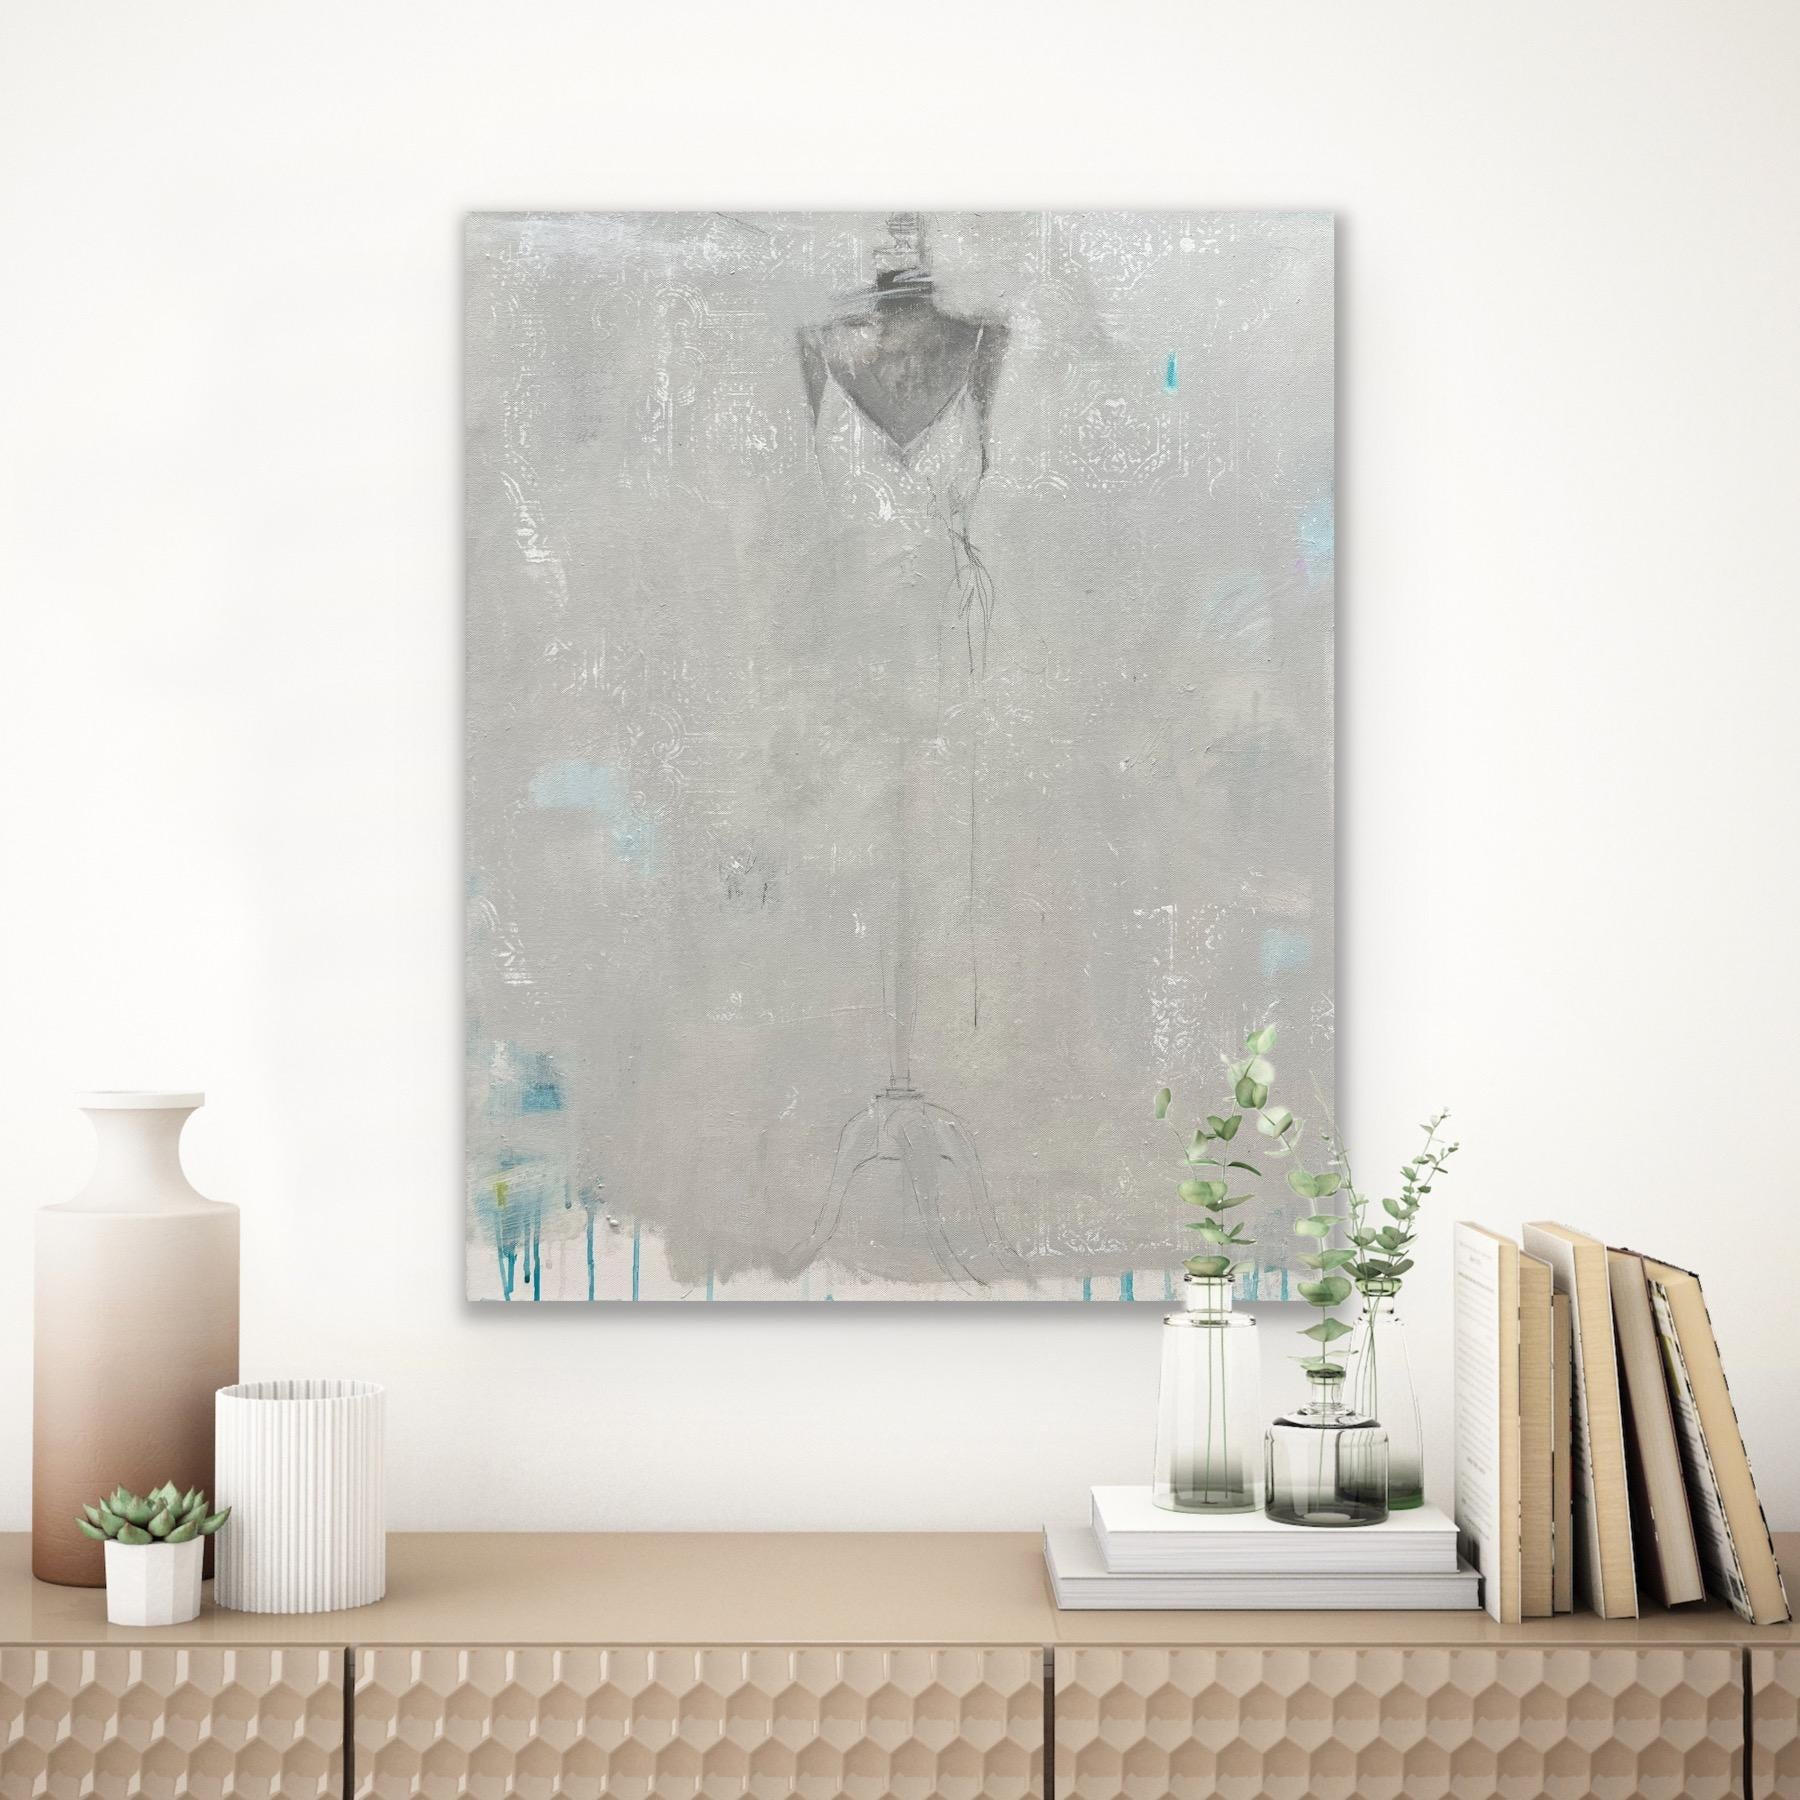 Underdressed - 24”x30”, Dress Painting, Figurative, Grey, White, Neutral, Blue For Sale 9